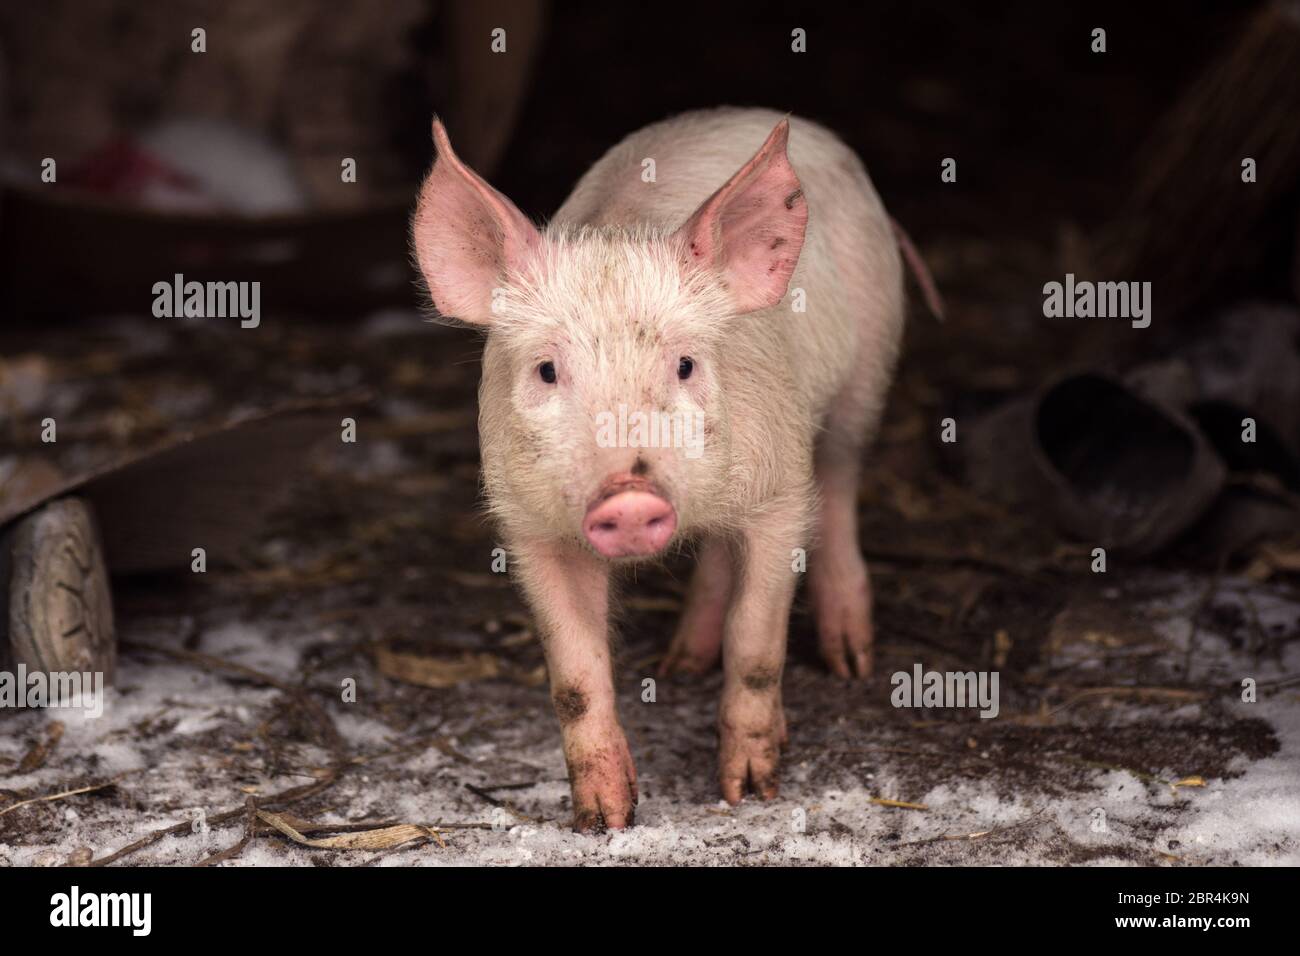 The little young domestic pig is standing on dirty poor rural scene background. Stock Photo